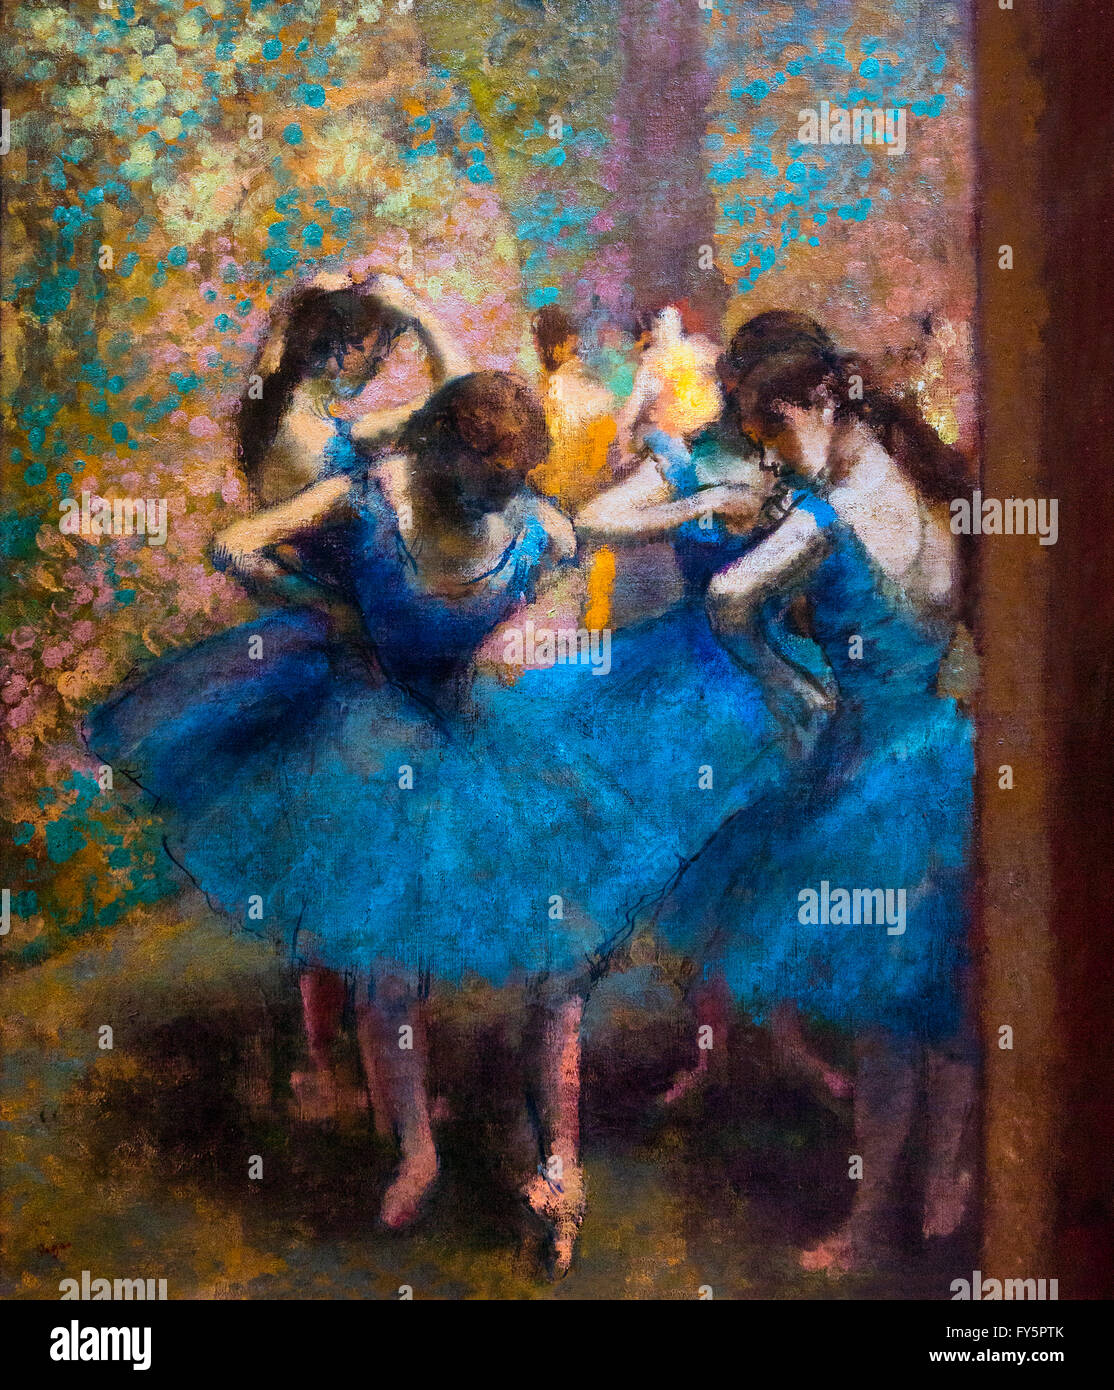 Dancers in Blue, by Edgar Degas, 1890, Musee D'Orsay Paris France Stock Photo